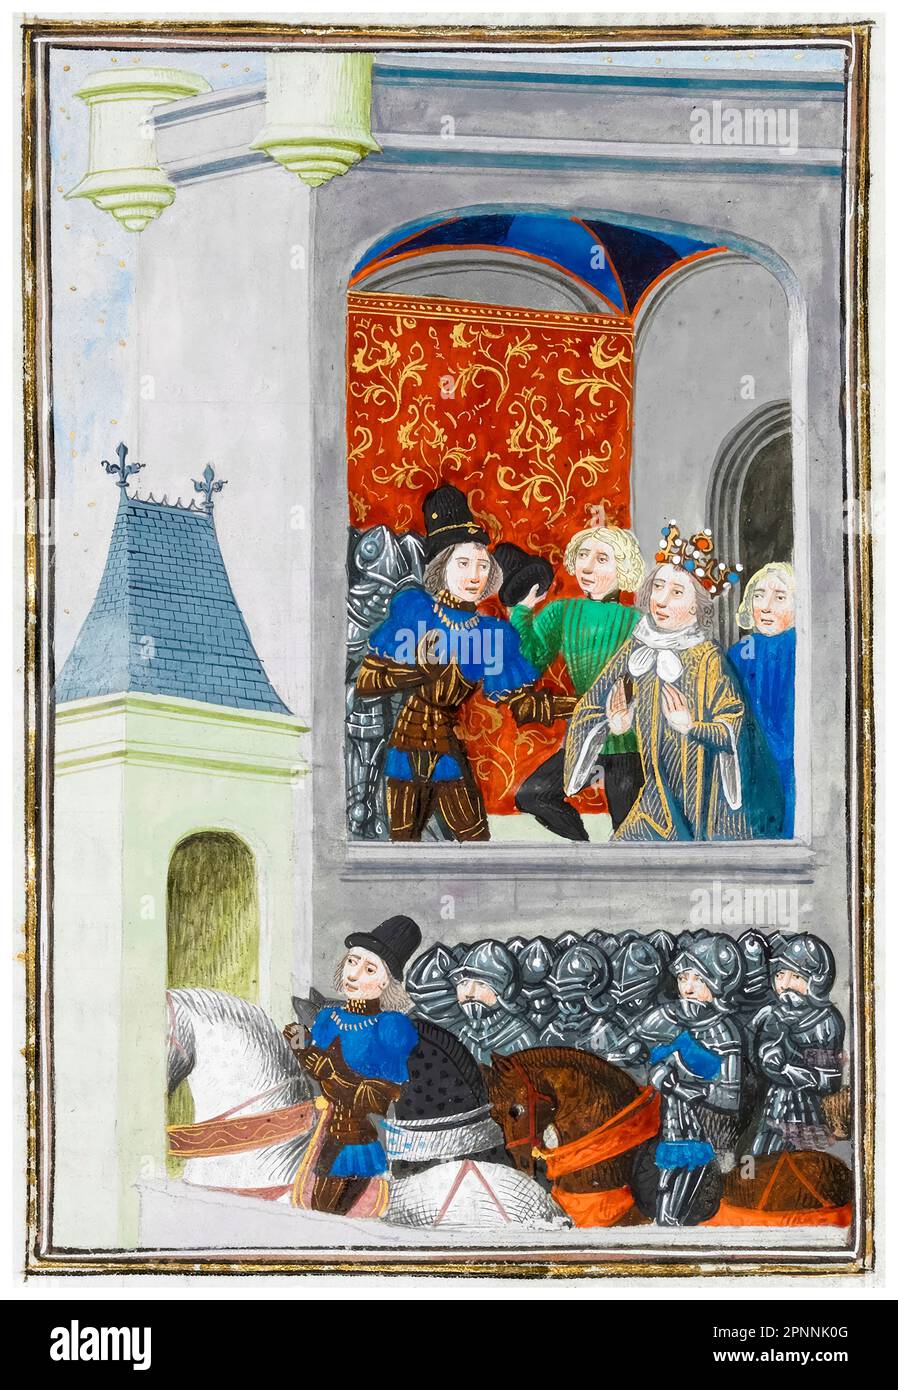 King Richard II of England (1367-1400) surrenders to Henry of Bolingbroke (later, Henry IV of England) at Flint Castle in Wales on the 19th August 1399, miniature illuminated manuscript painting by Jean Froissart, 1470-1472 Stock Photo